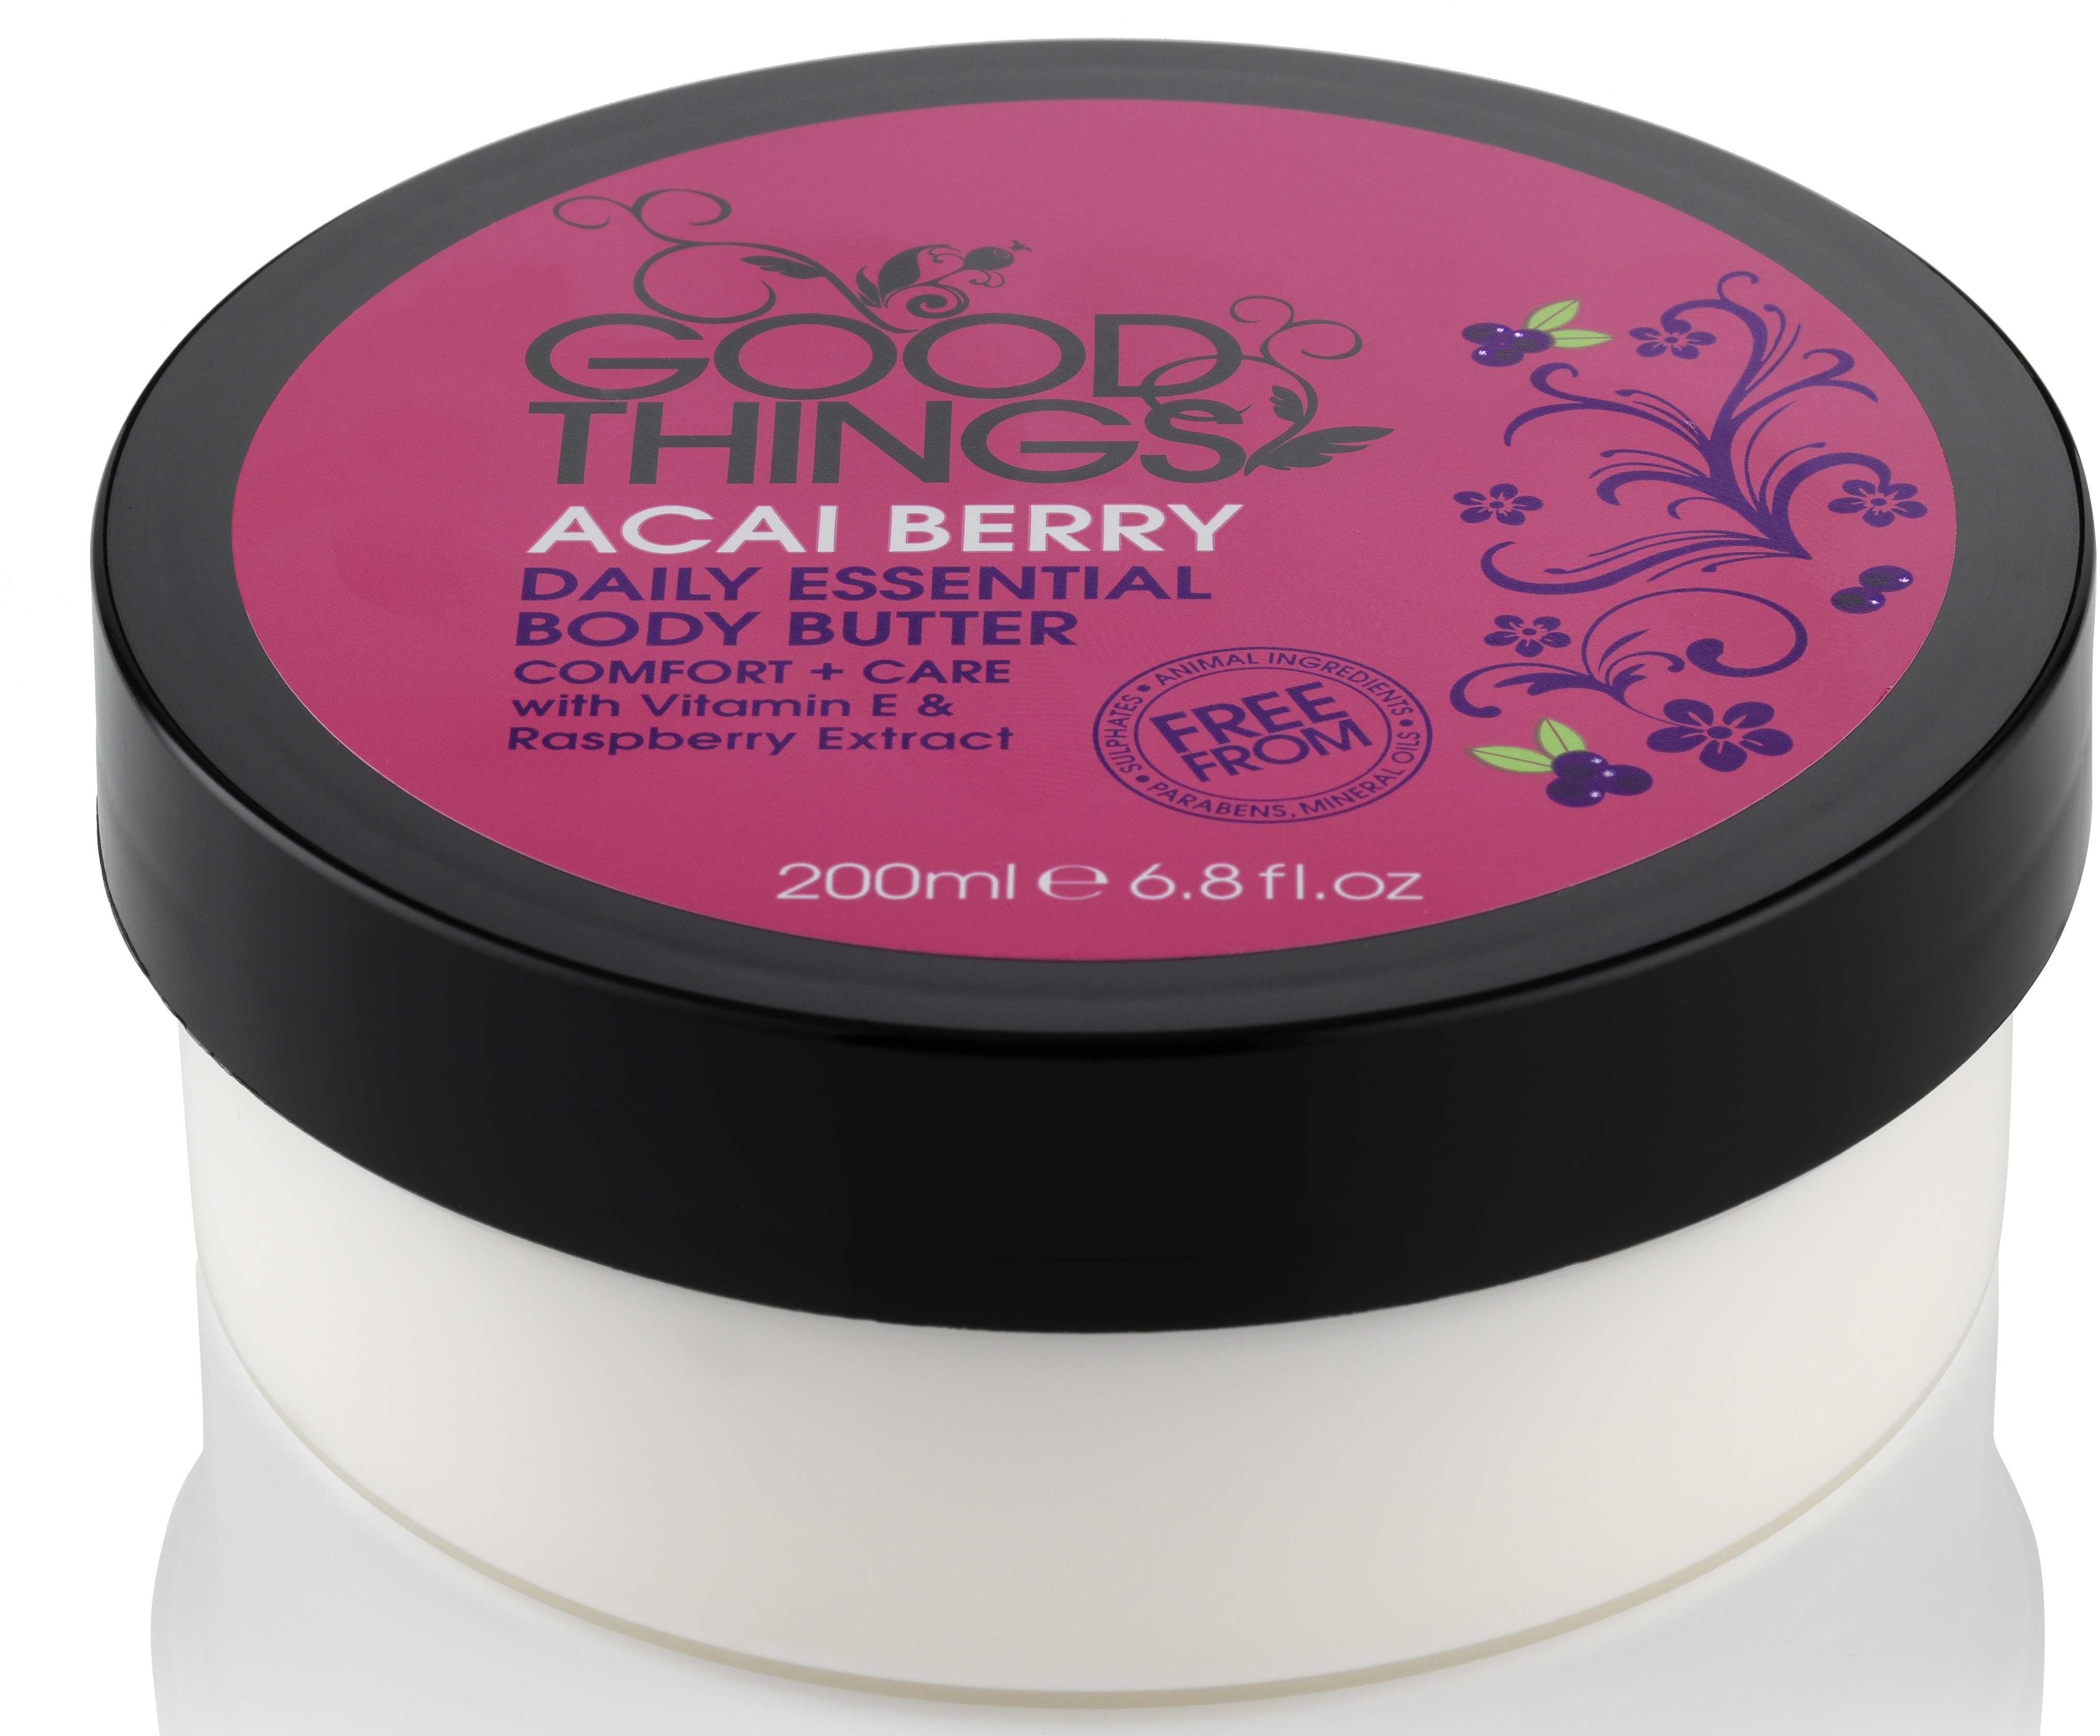 Good Things Acai Berry Body Butter